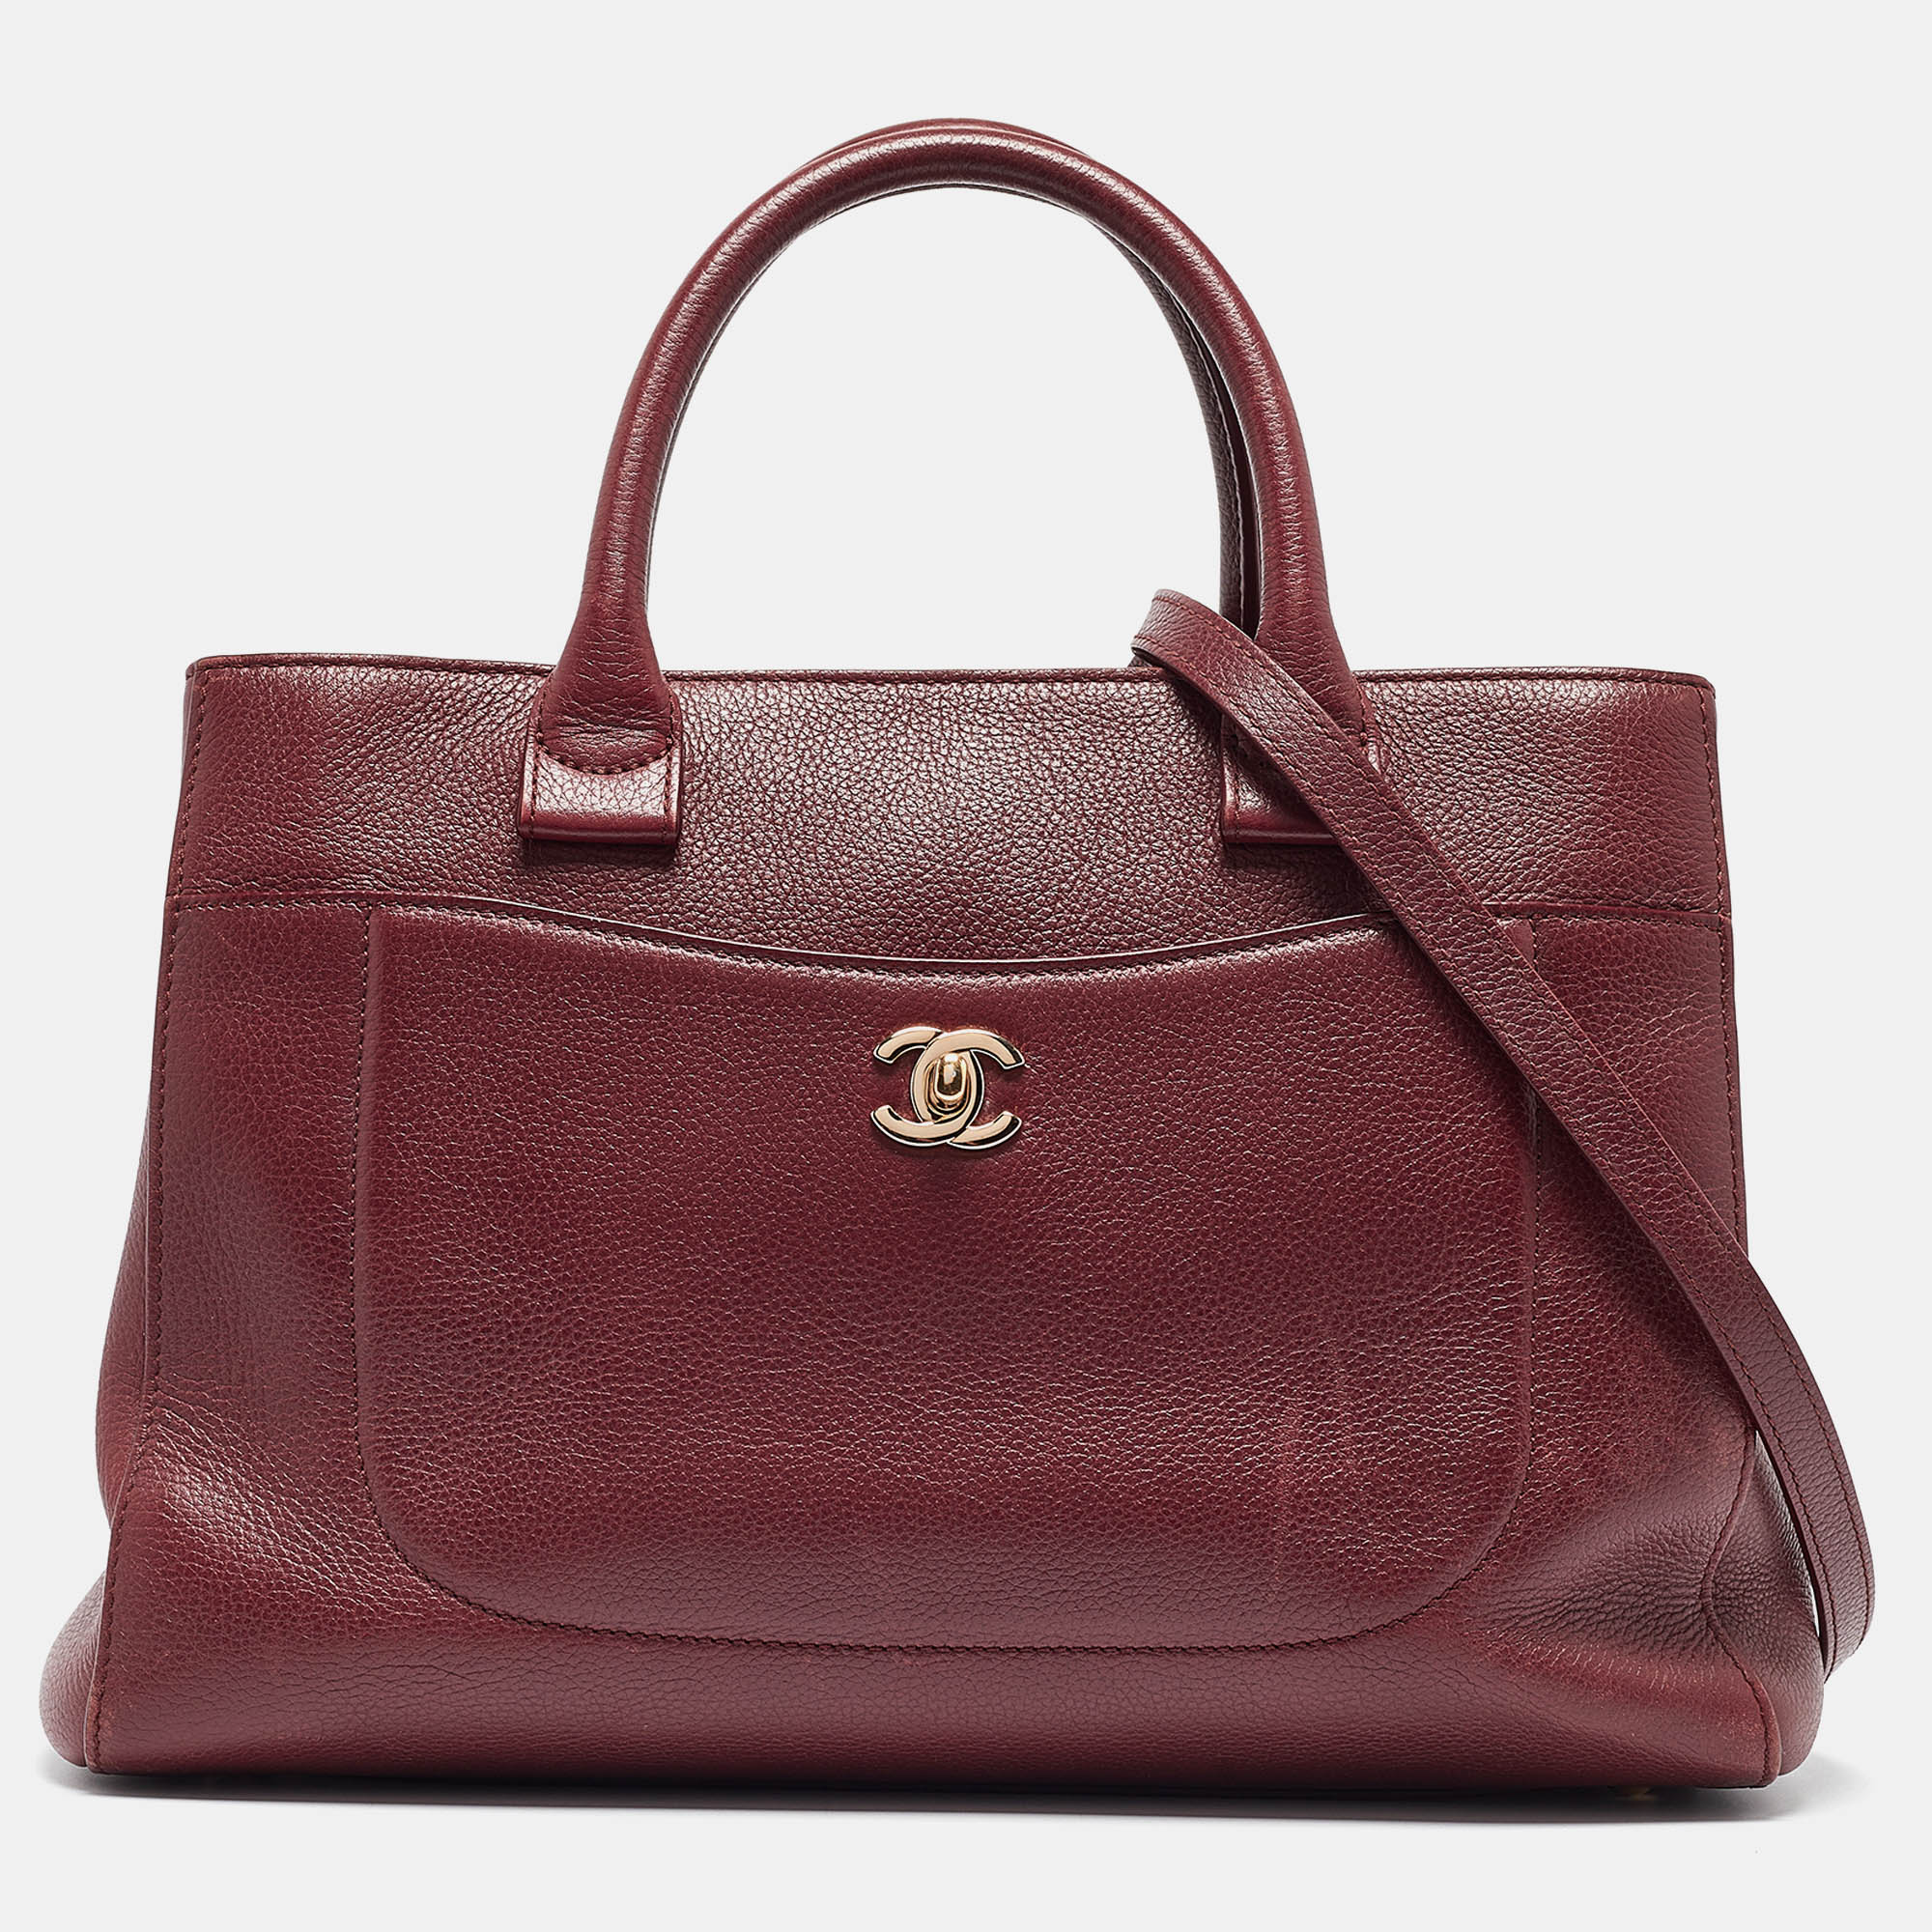 Pre-owned Chanel Burgundy Leather Small Neo Executive Shopper Tote